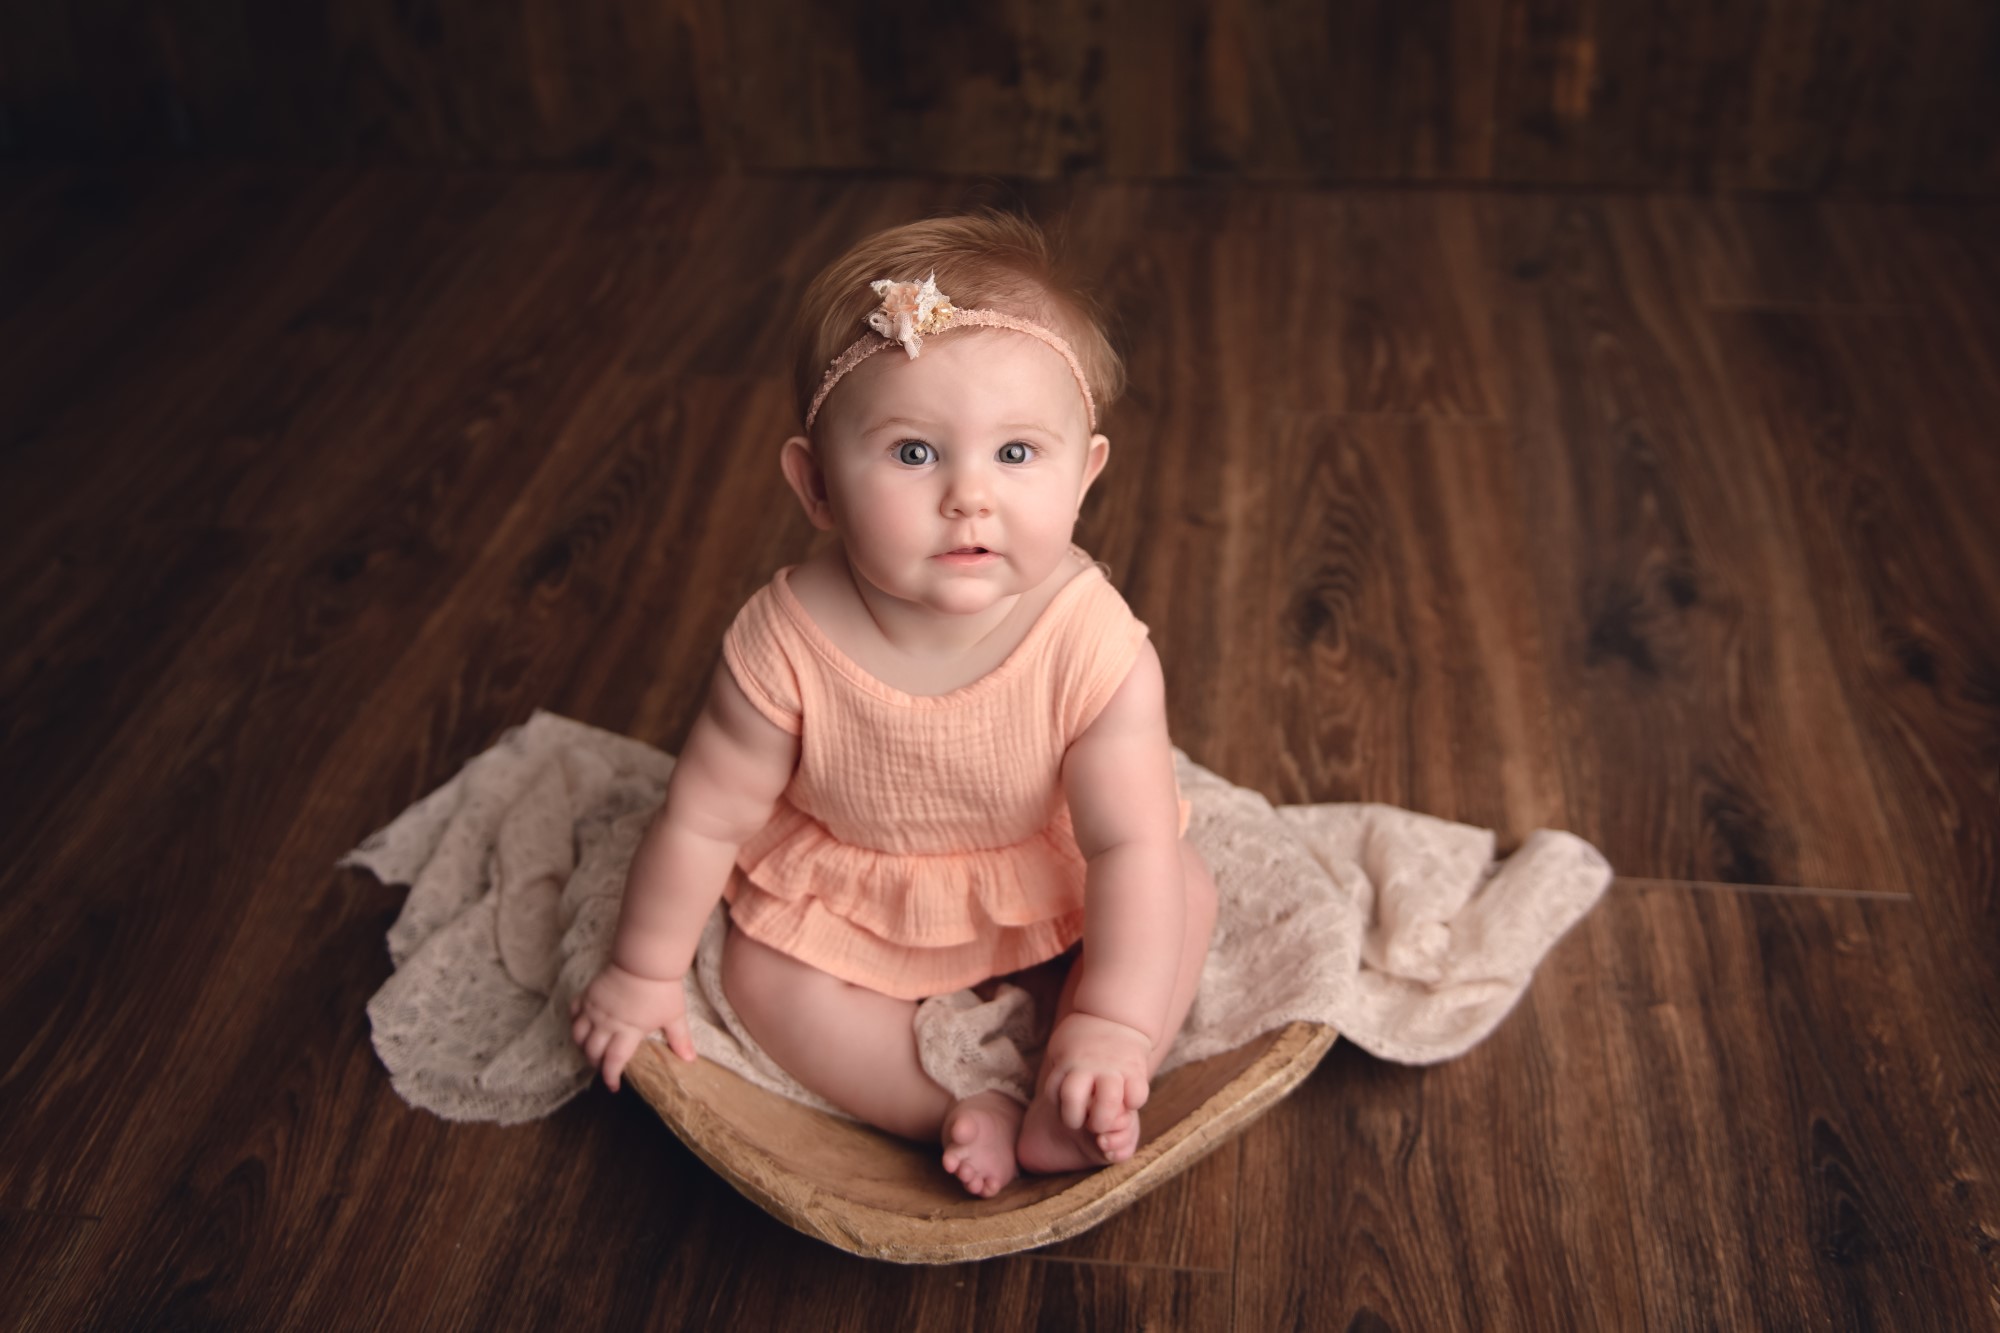 professional baby photographer in holly springs ga - courtney elise photography